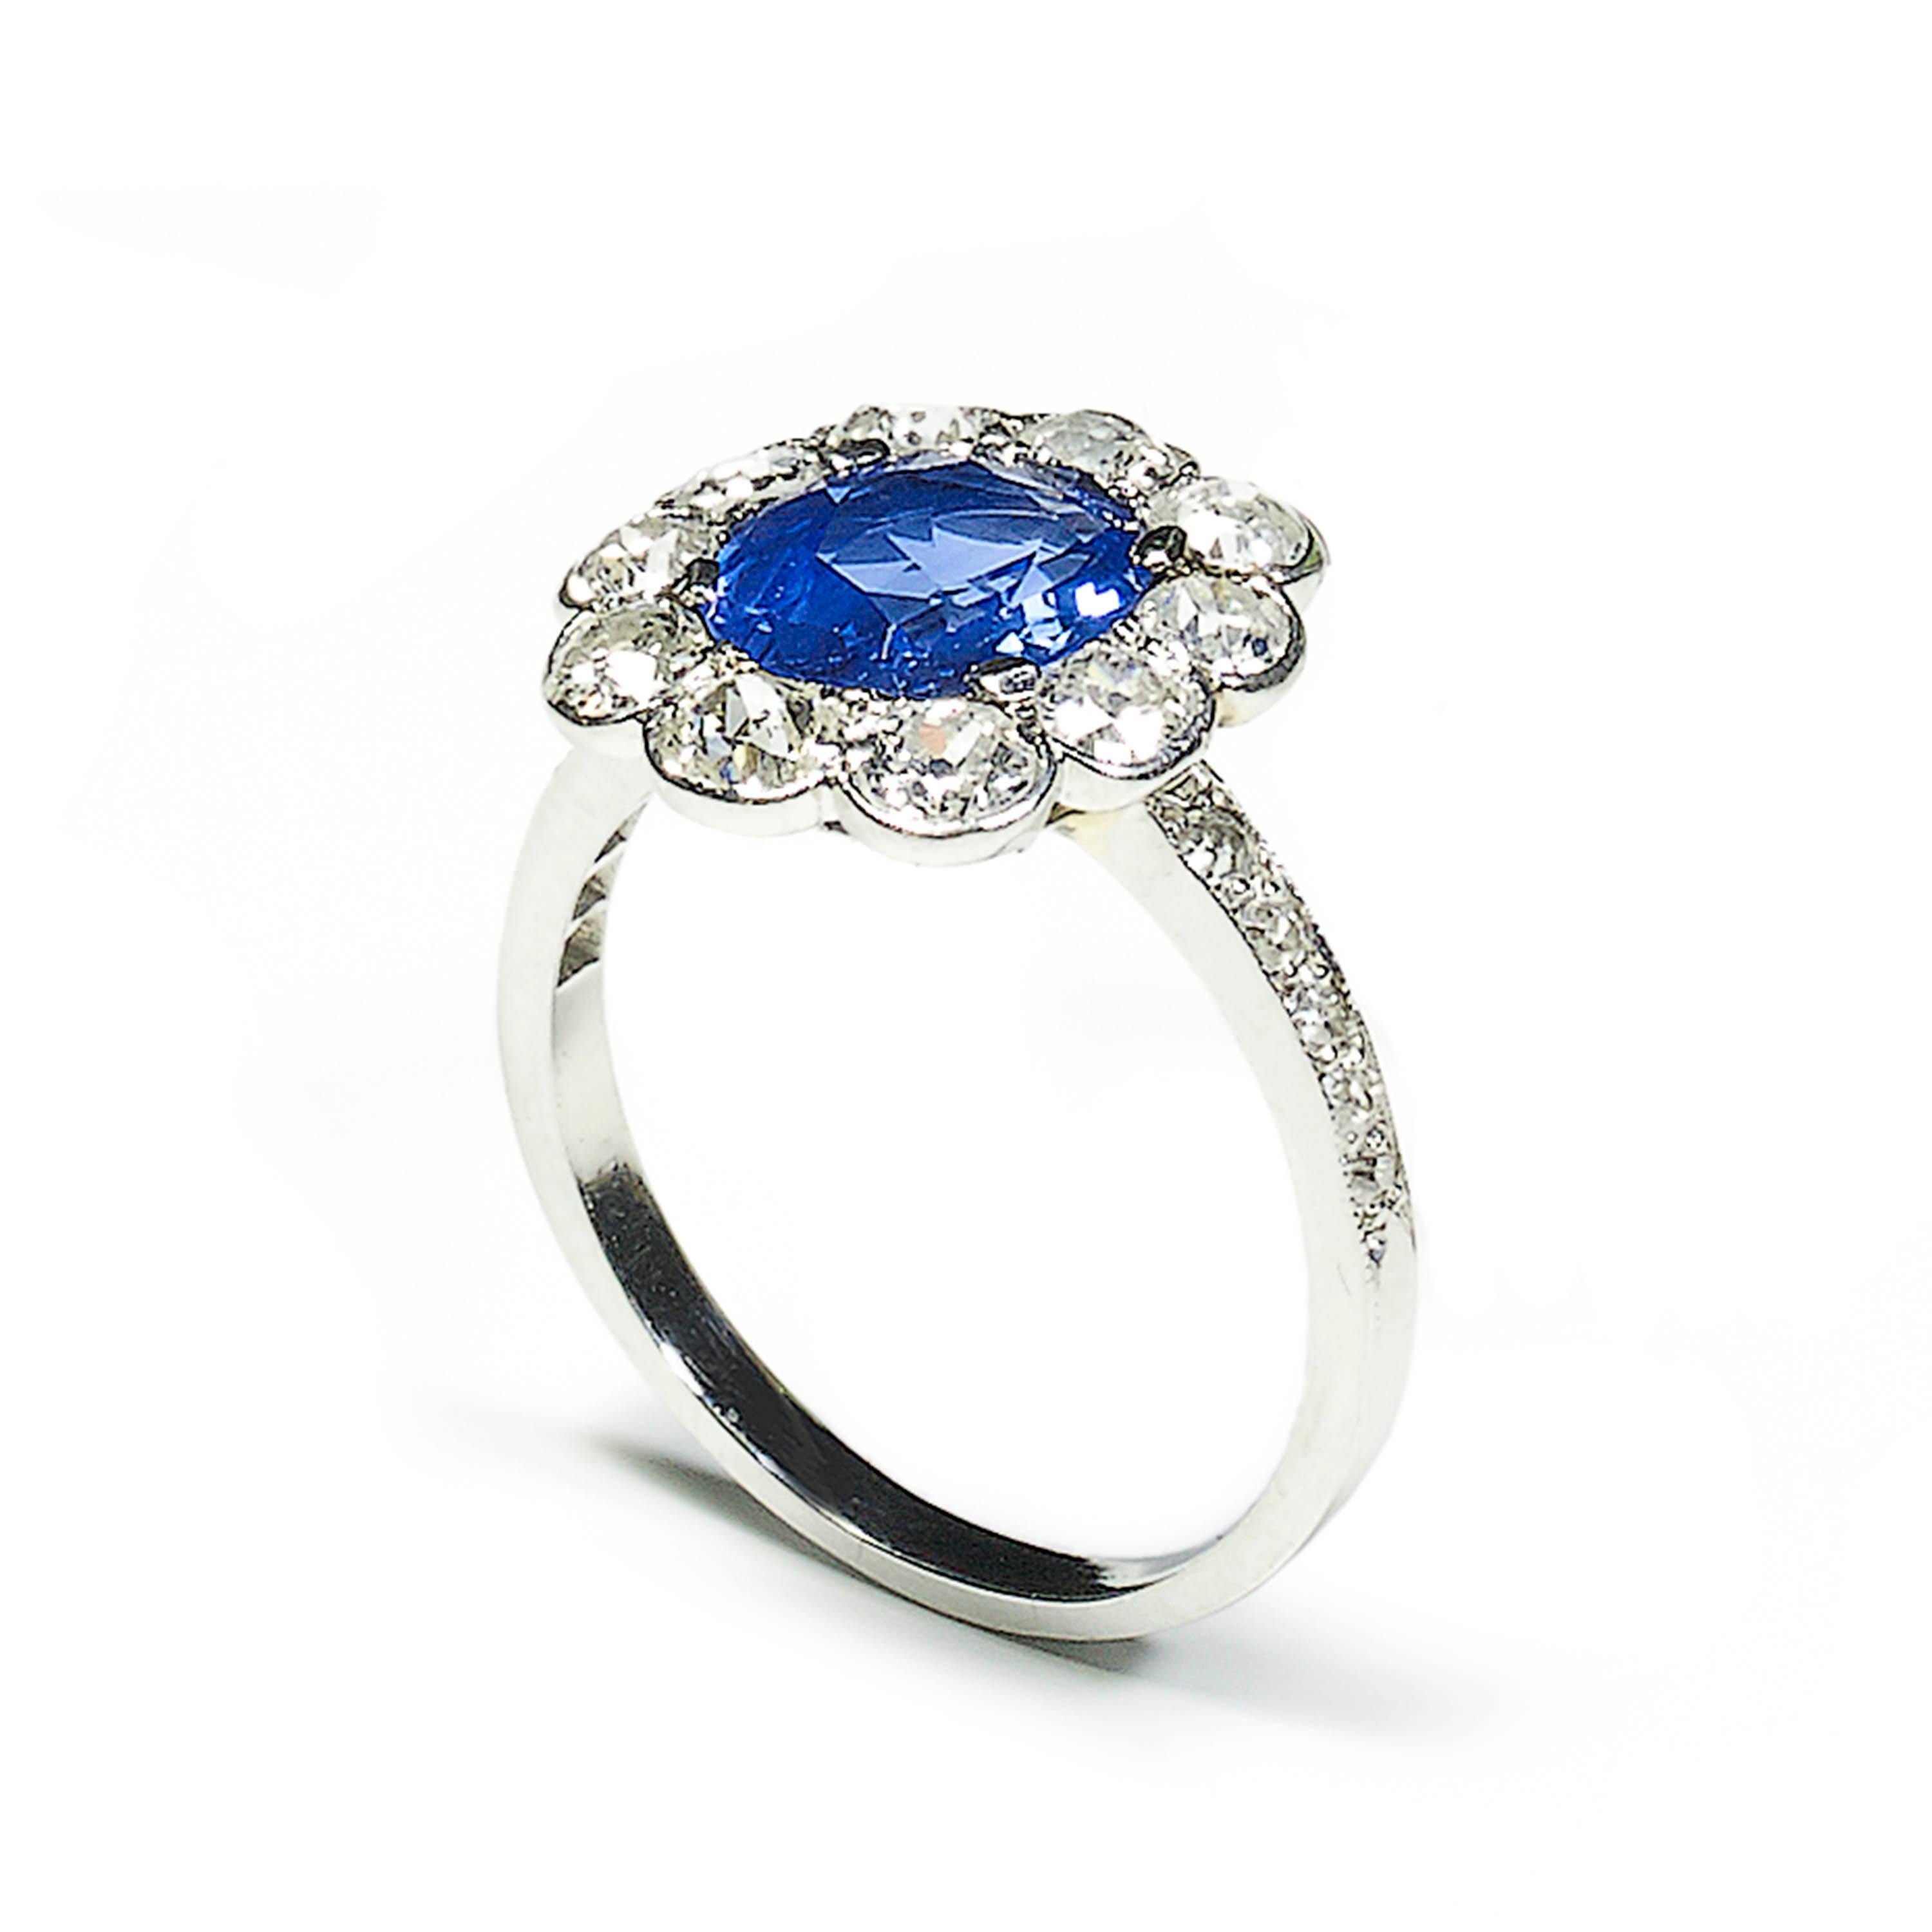 A French sapphire and diamond cluster ring, set with an approximately 1.72ct, unheated, oval, native-cut, Ceylon sapphire in a four claw setting, surrounded by ten, old-cut diamonds in grain and rub over settings, with eight-cut diamonds set in